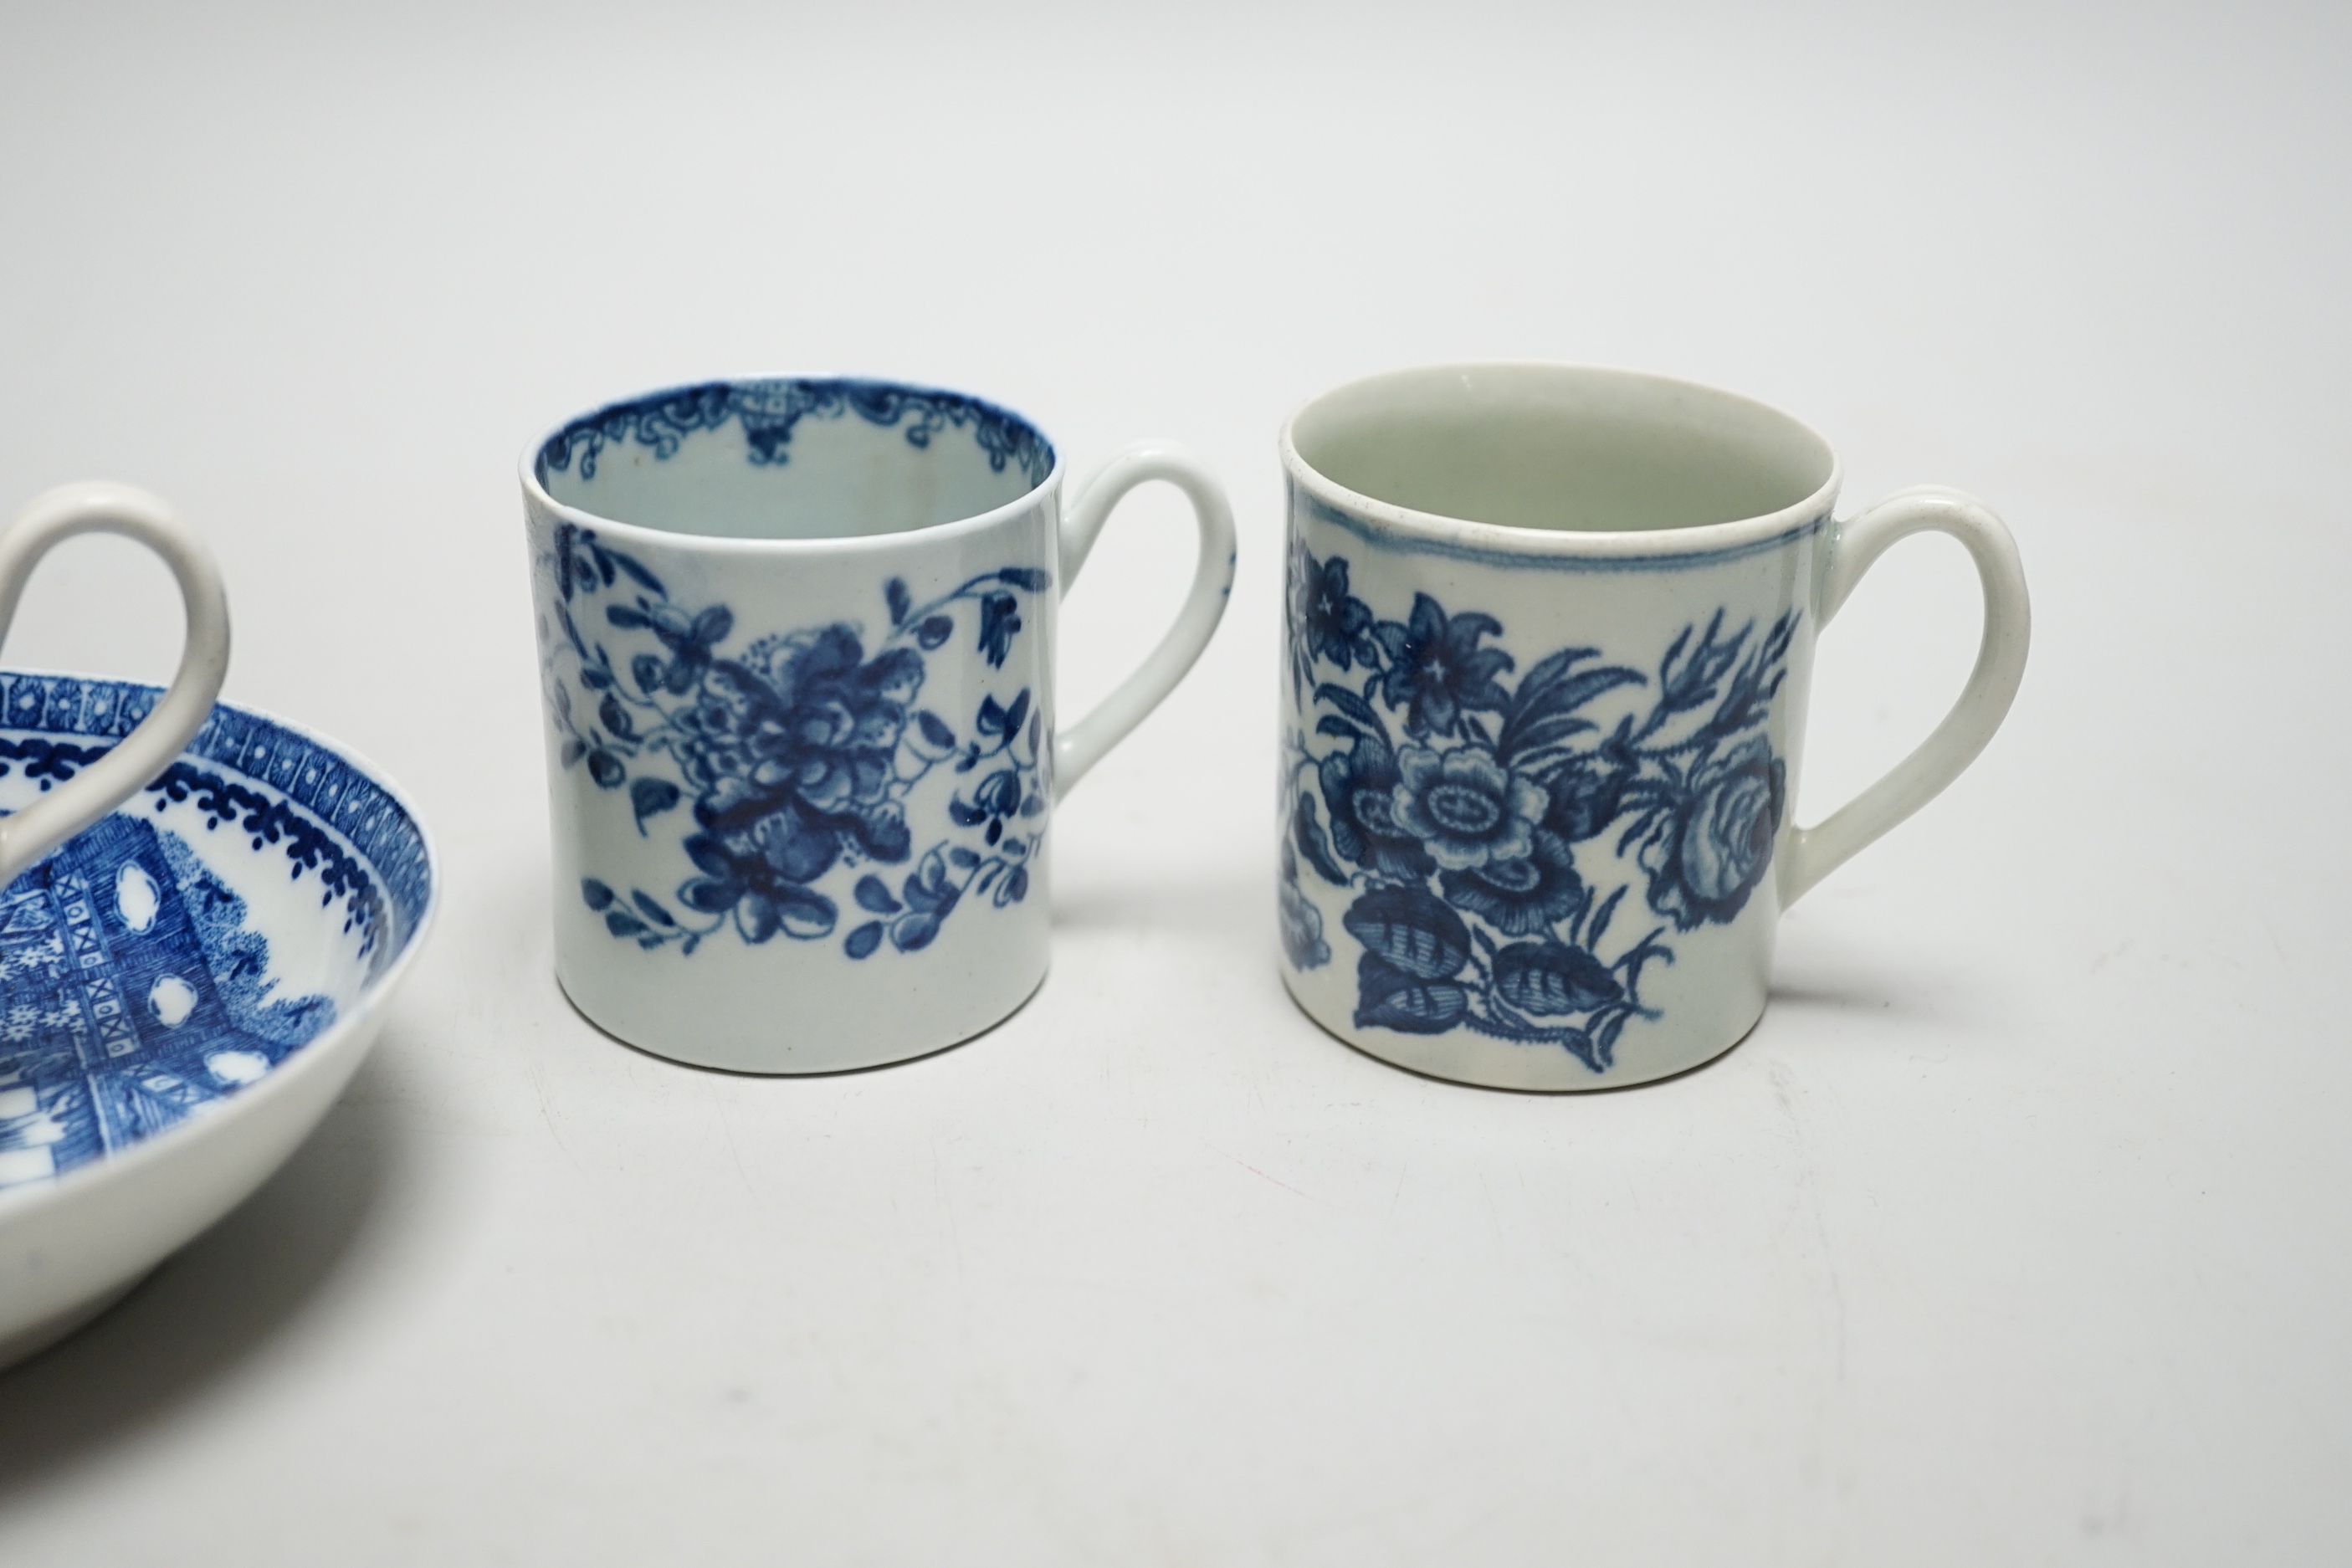 Two Worcester coffee cans, Mansfield and Three Flowers patterns, and a Worcester/Caughley coffee cup and saucer, Fisherman and Cormorant pattern